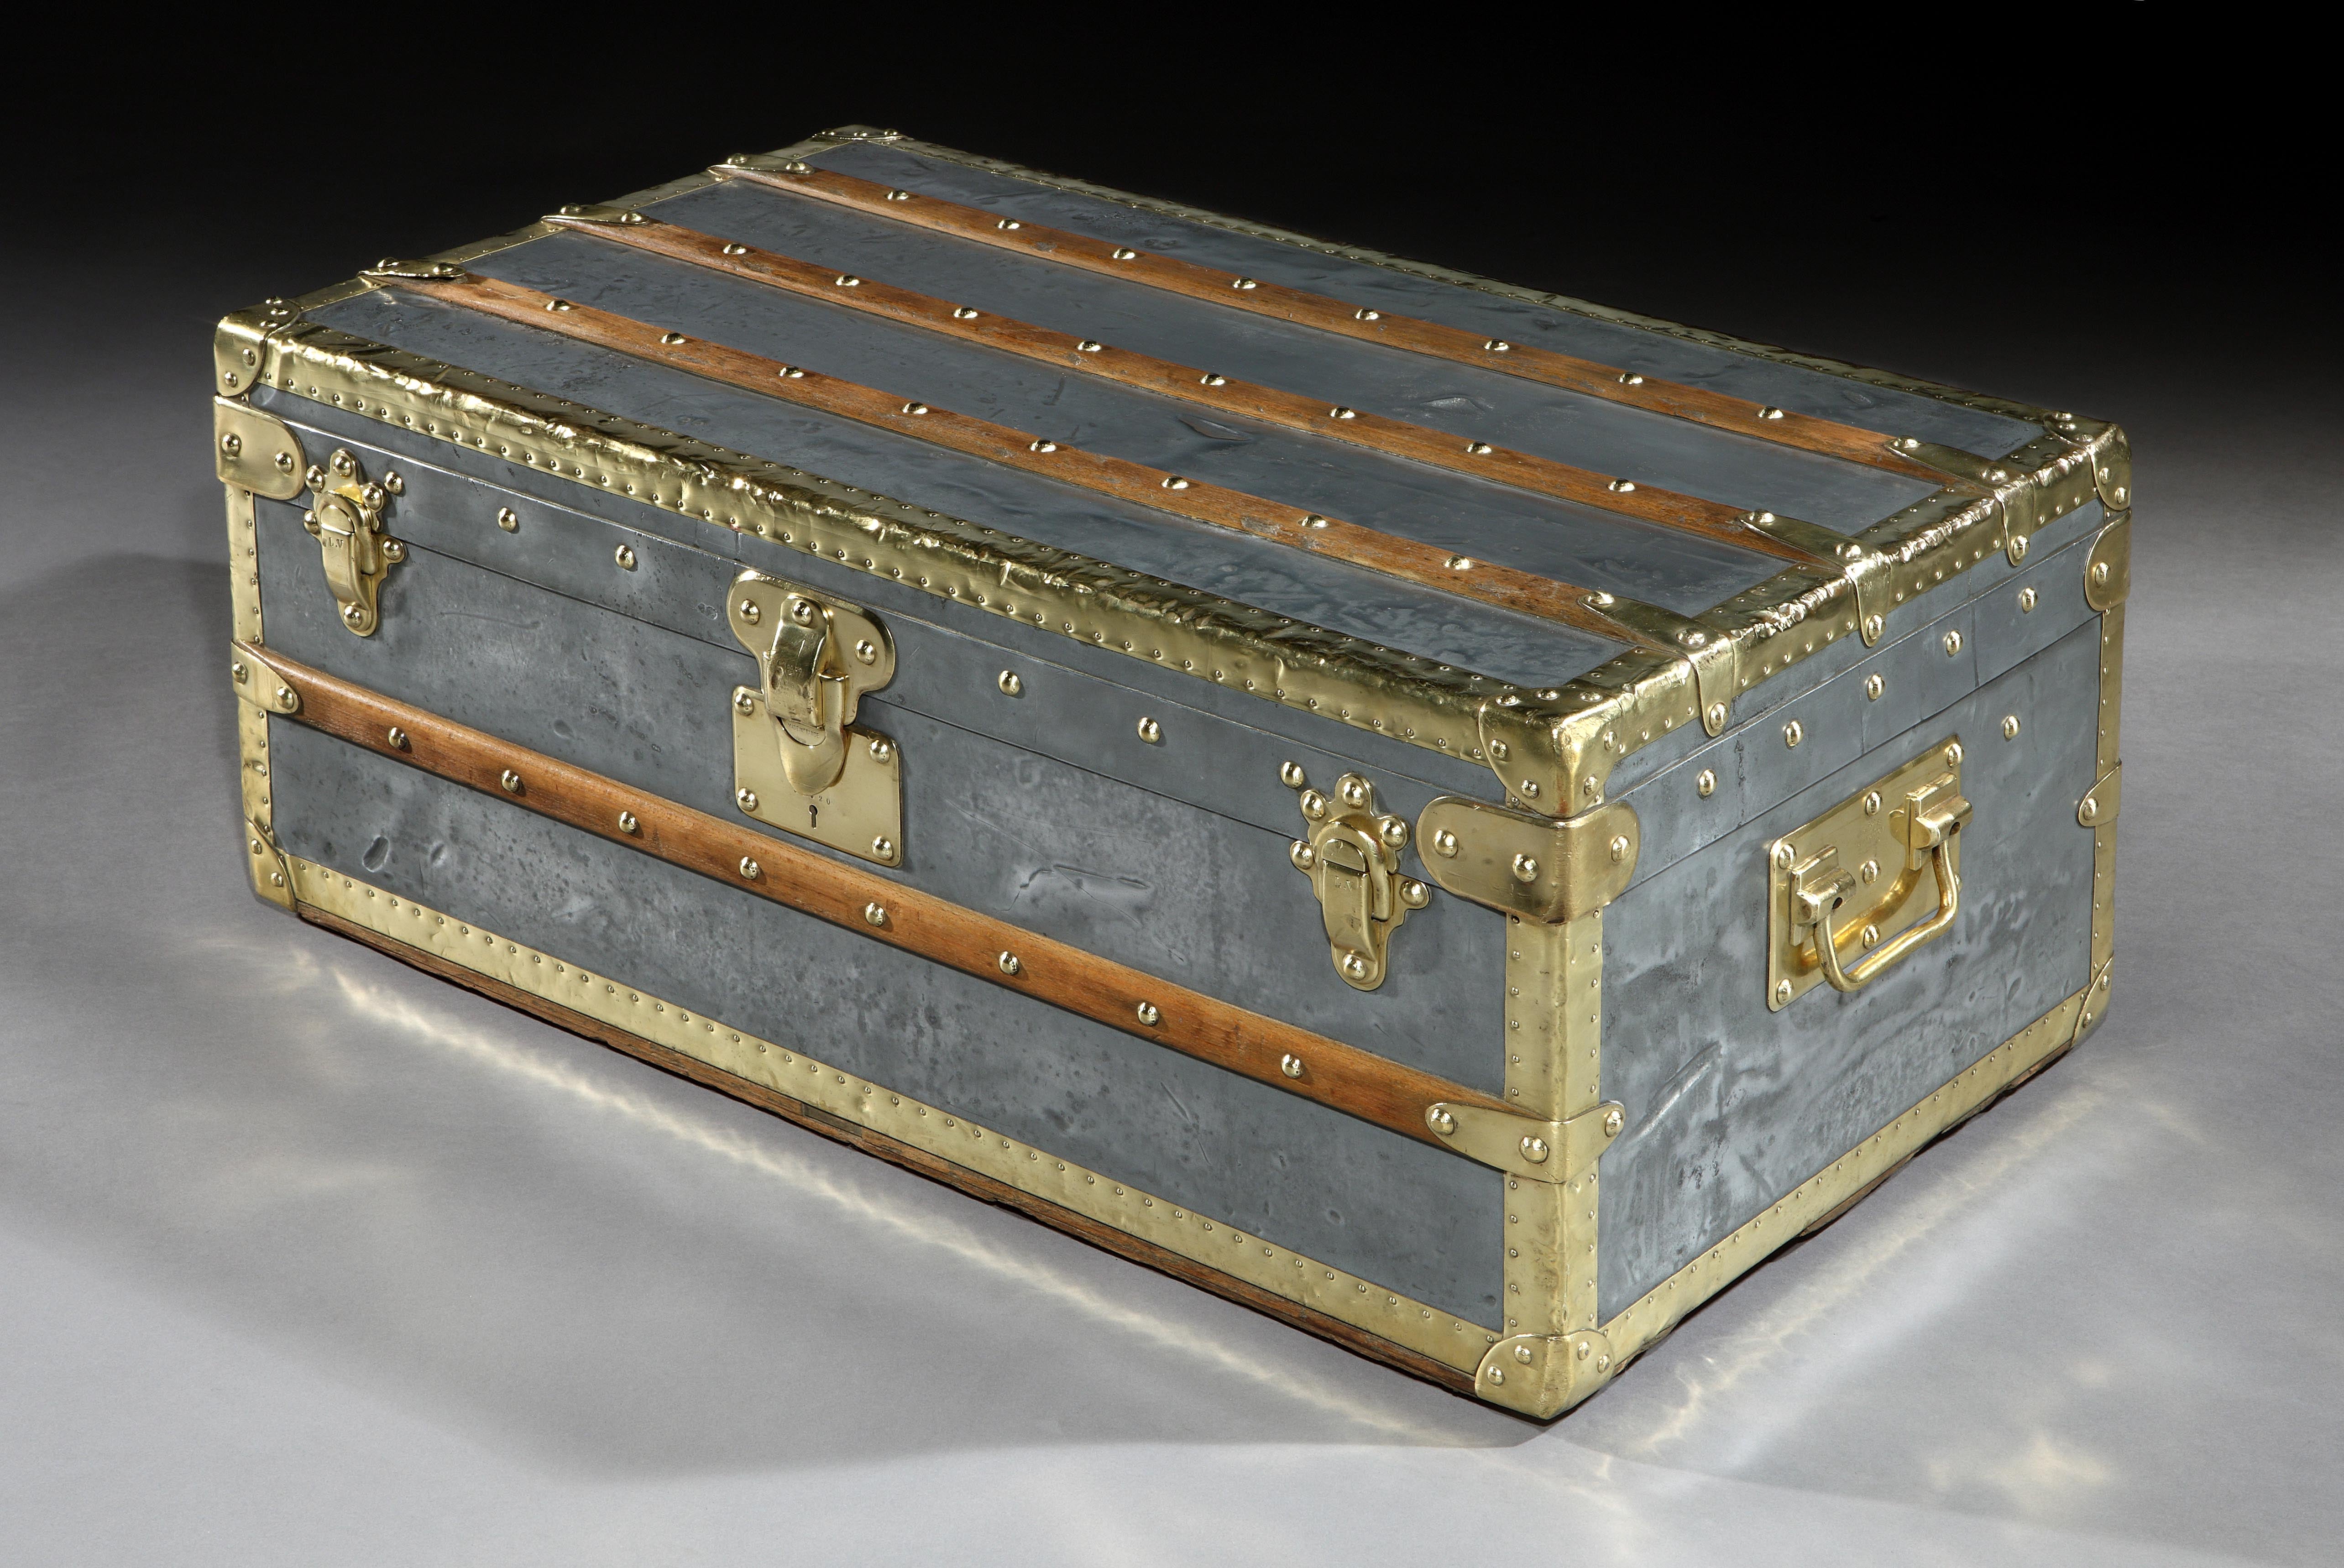 Extremely rare all-zinc cabin trunk by Louis Vuitton, c. 1890s